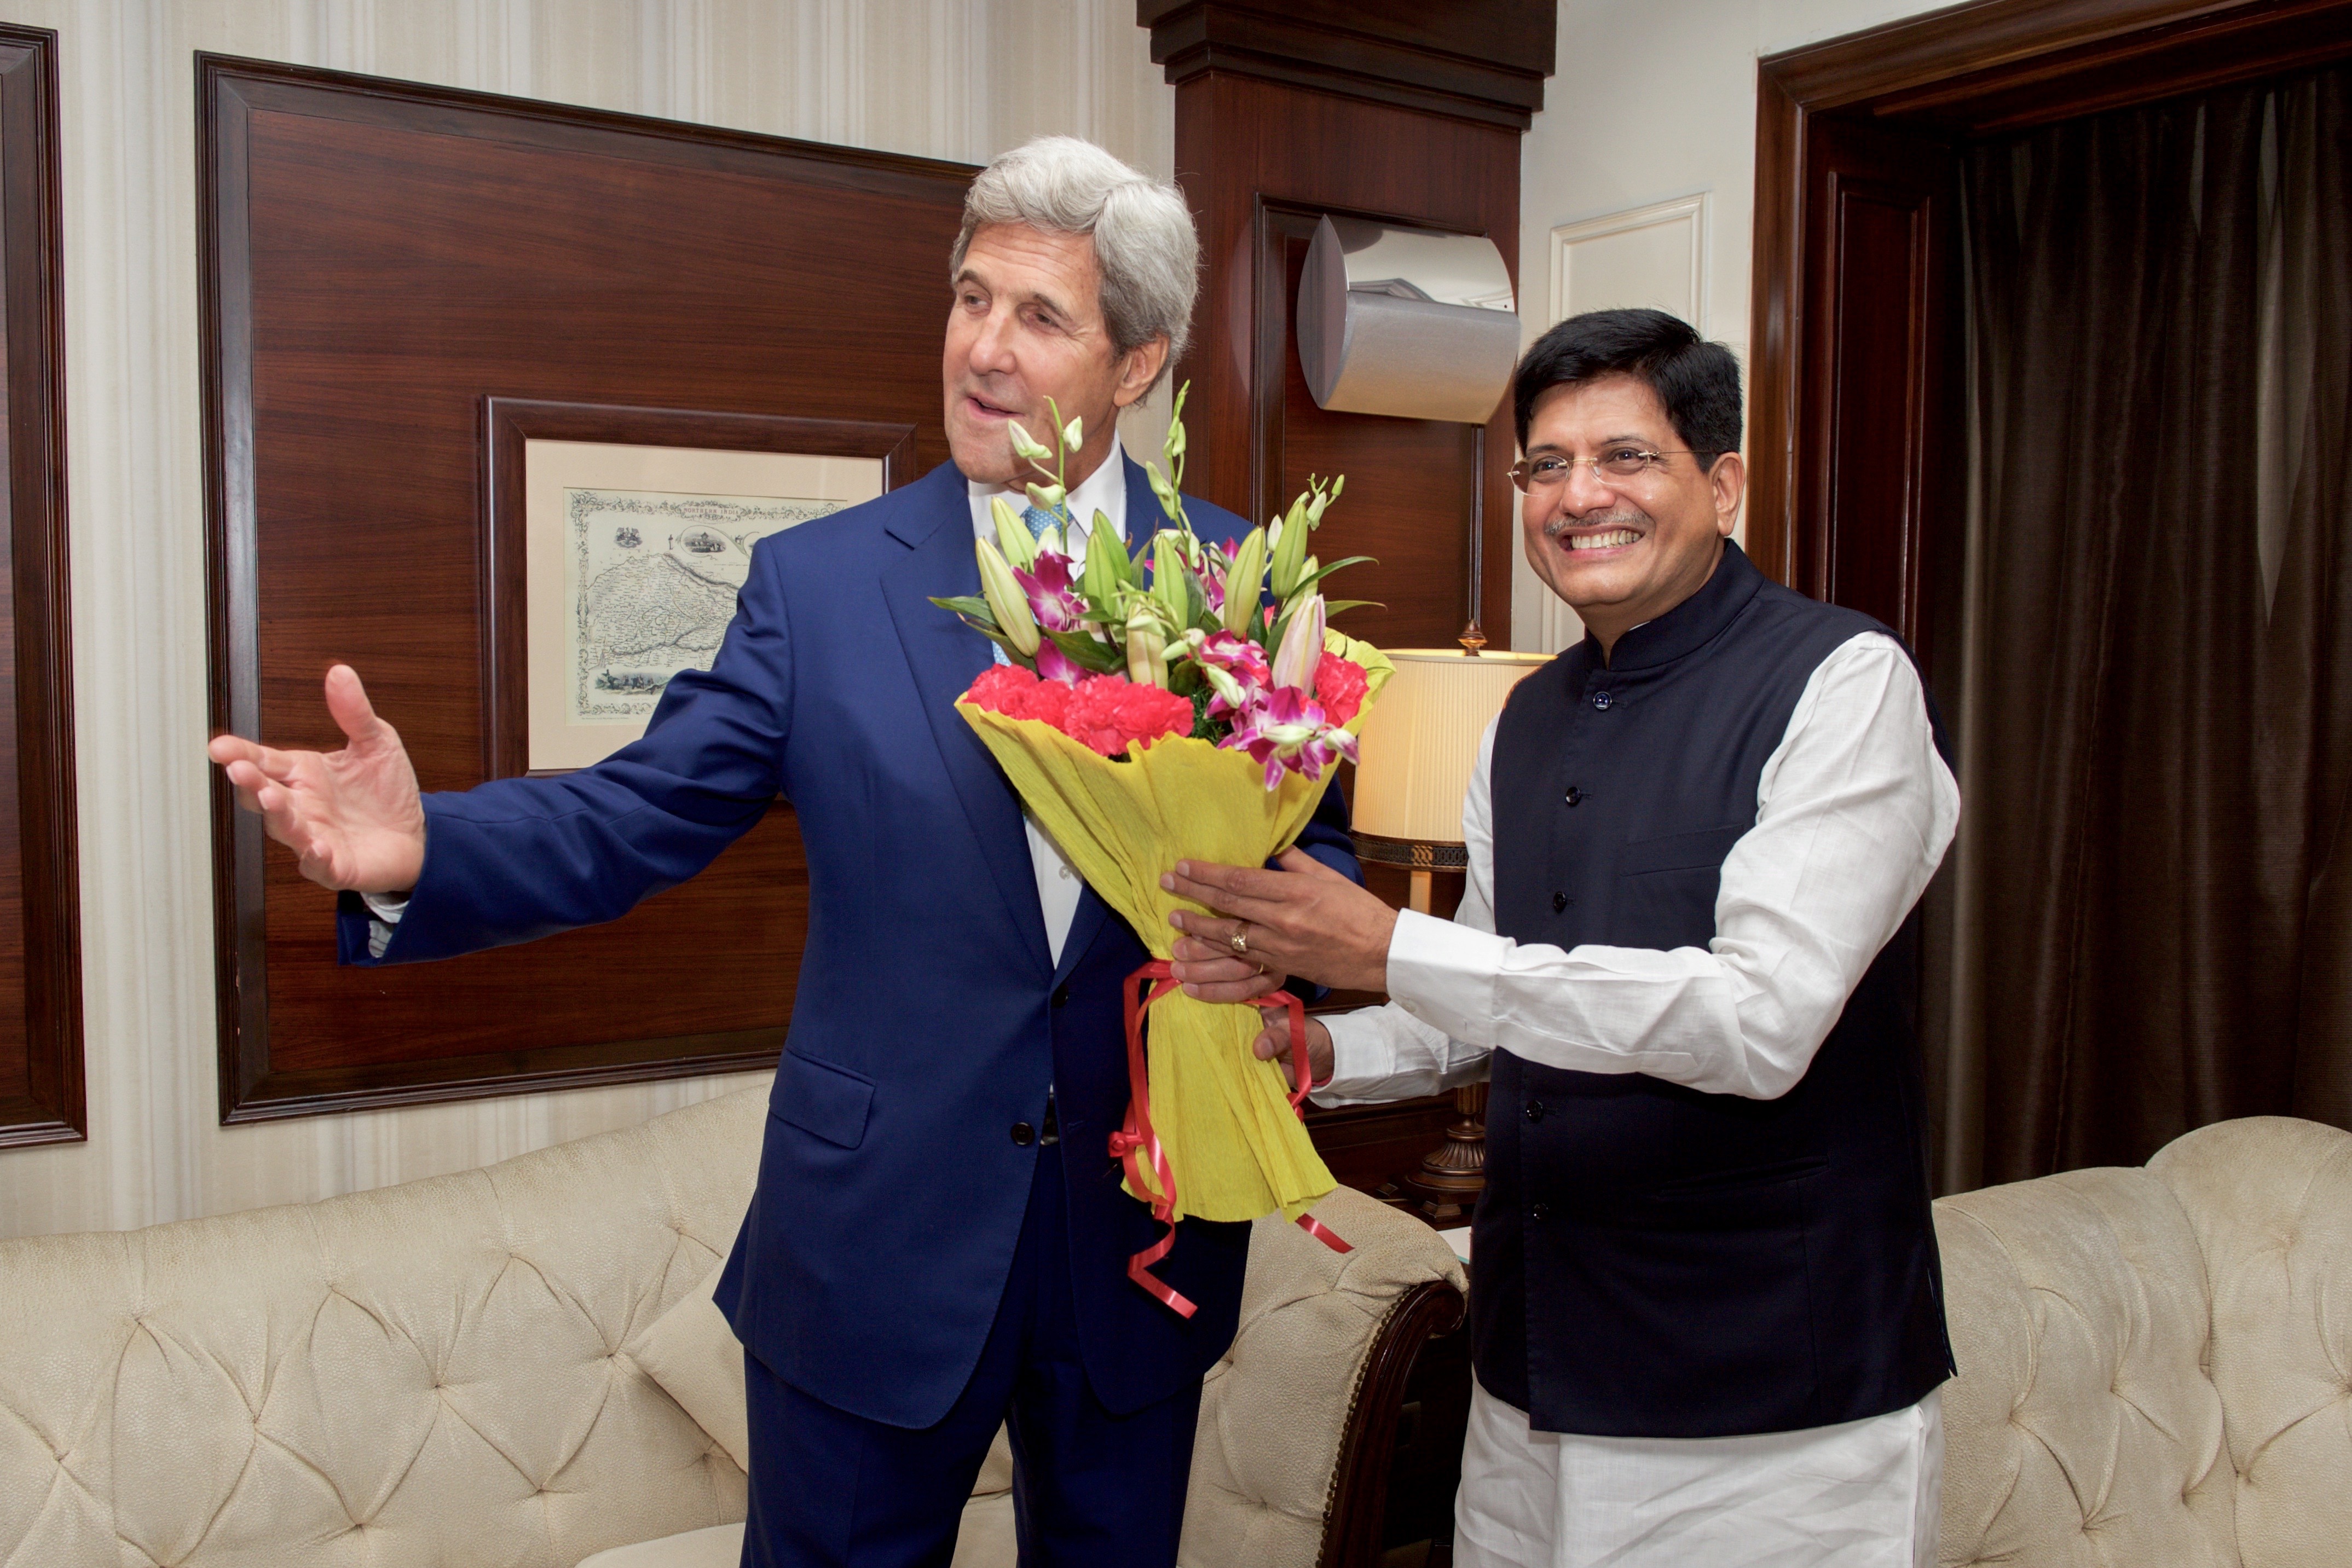 Secretary Kerry Holds Flowers Presented to him by Indian Minister of Power Piyush Goyal at the Le Meridien Hotel in New Delhi (29253781451)